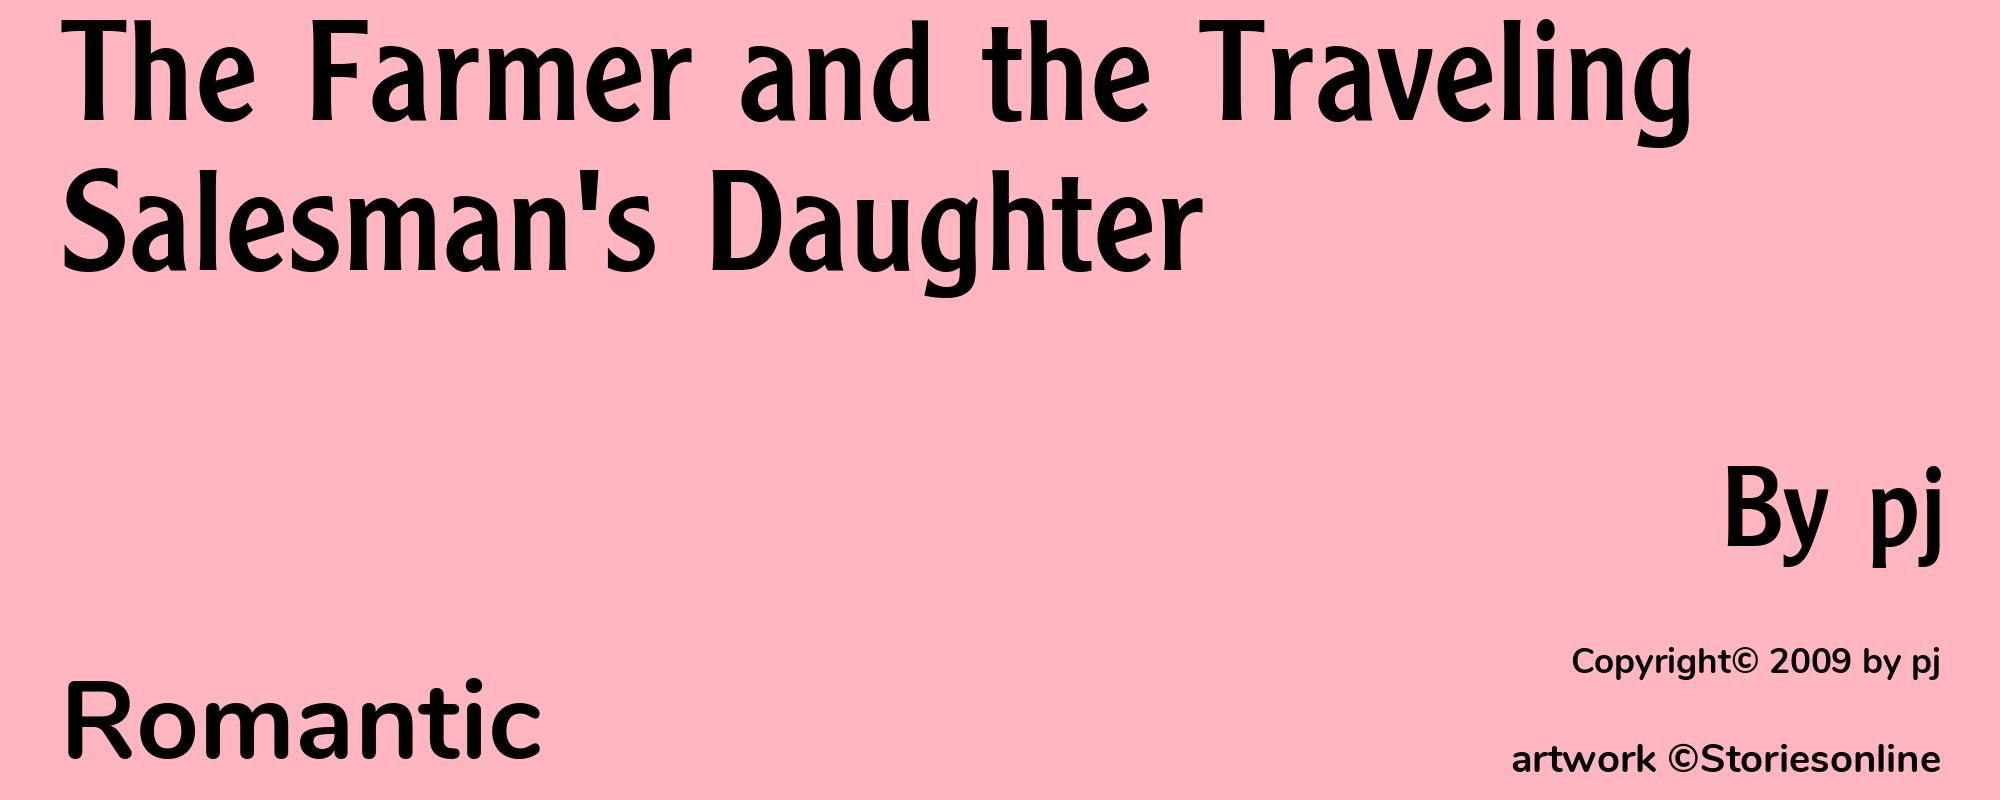 The Farmer and the Traveling Salesman's Daughter - Cover